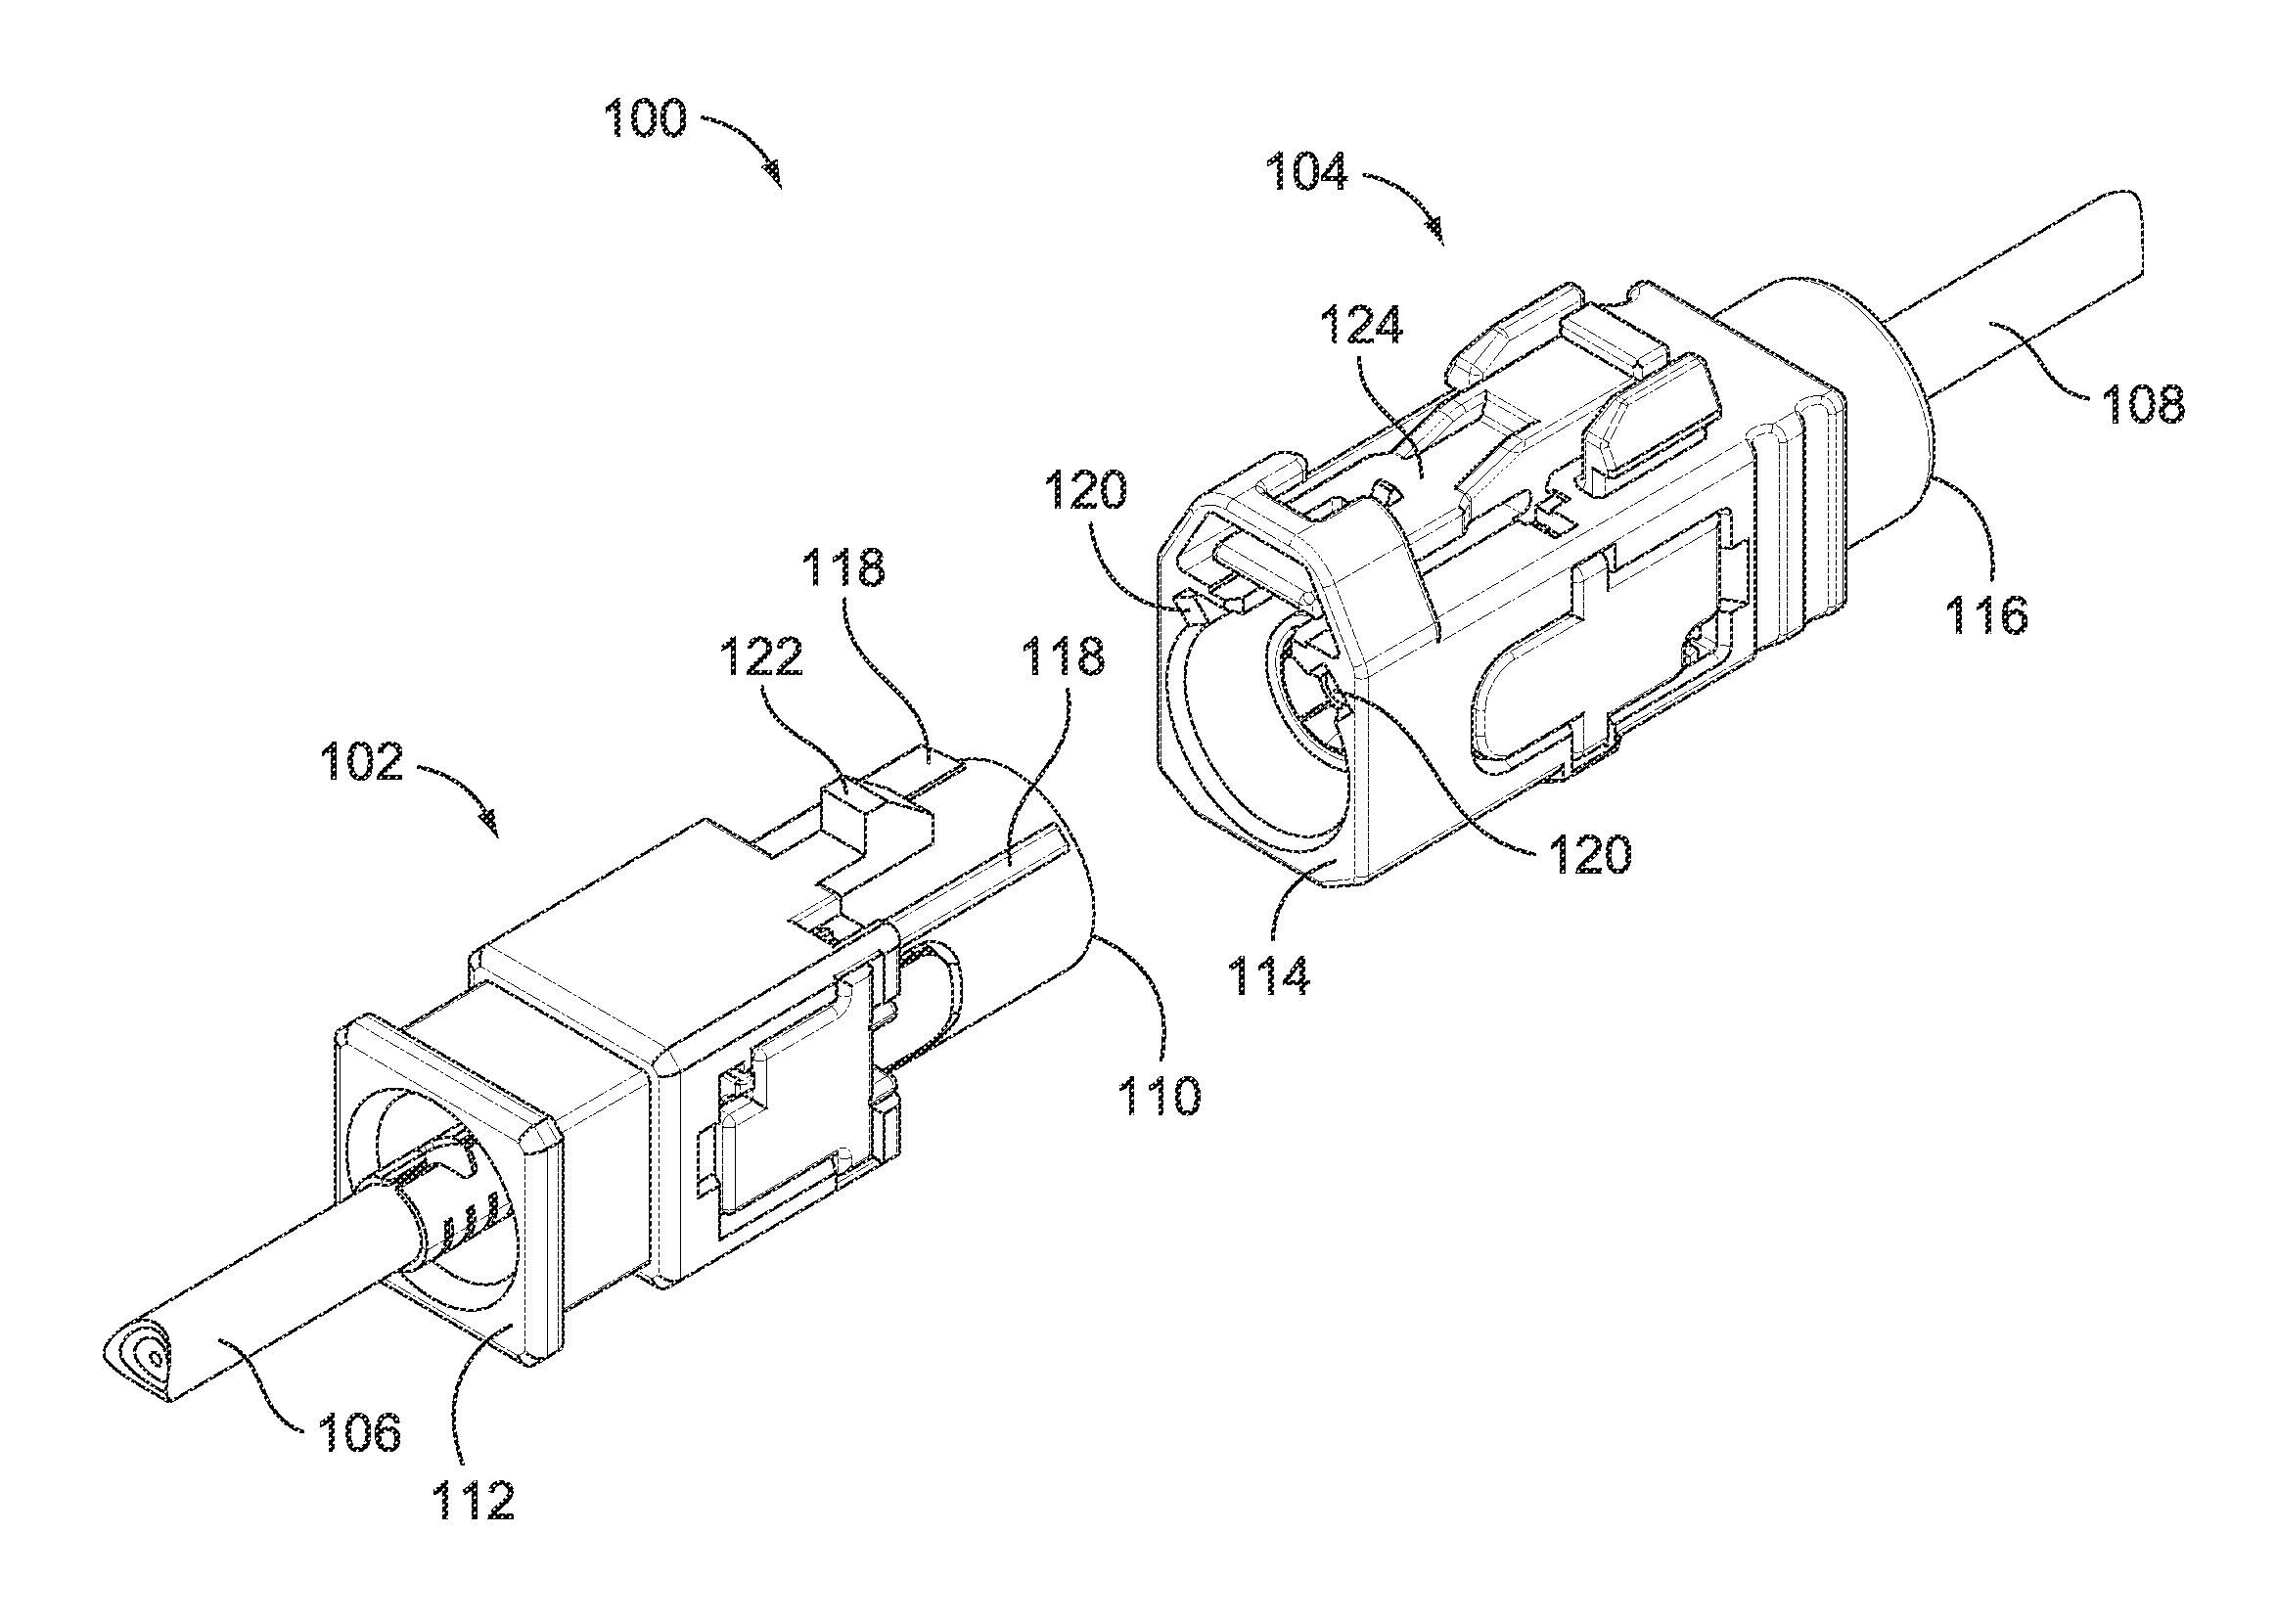 Radio frequency connector assembly